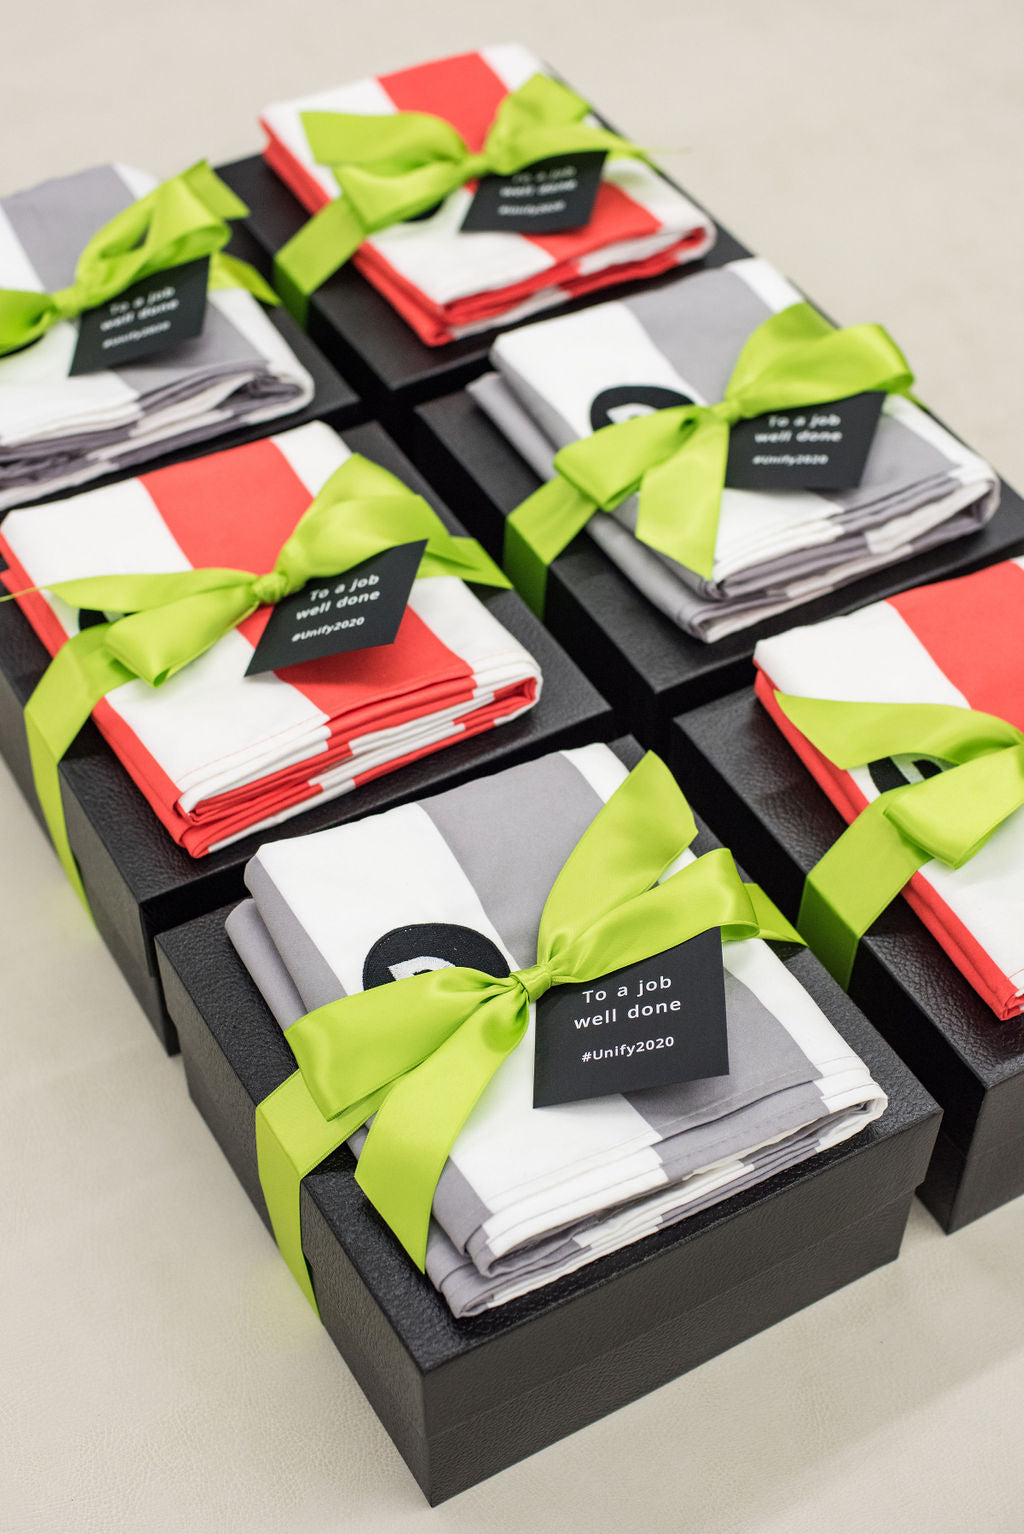 virtual-event-gift-boxes-for-Deloitte-by-Marigold-Grey